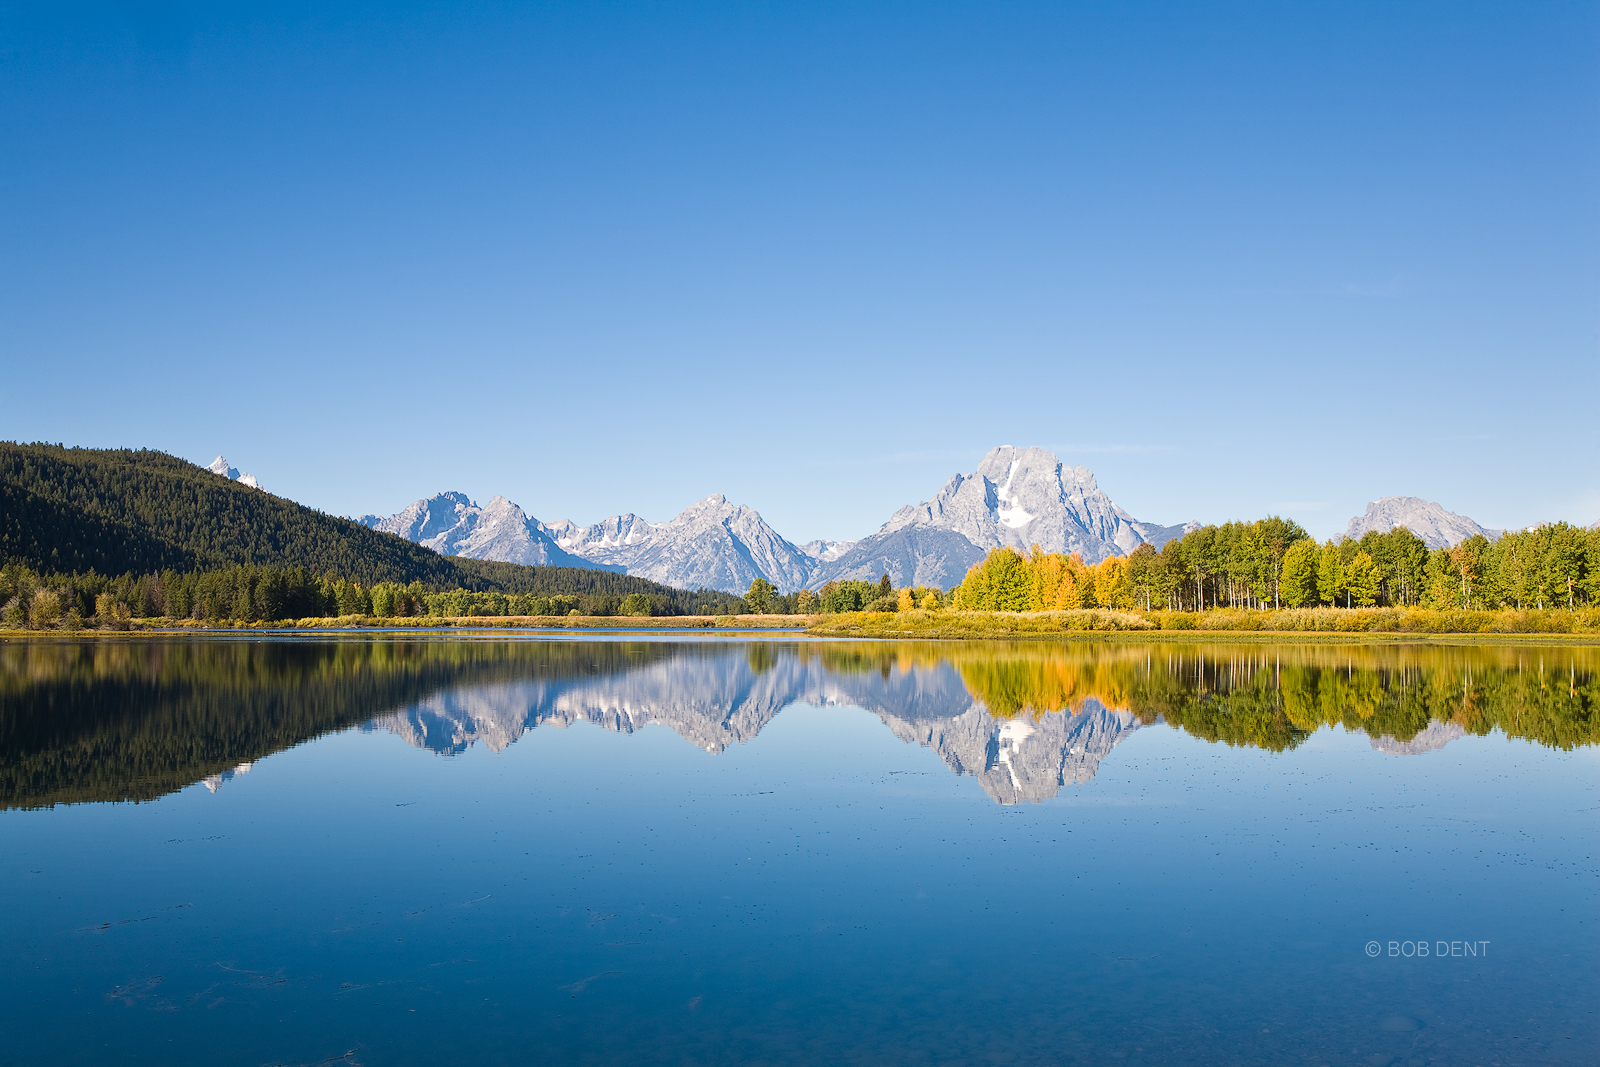 Mt. Moran reflecting in the Snake River at Oxbow Bend, Grand Teton National Park, Wyoming.